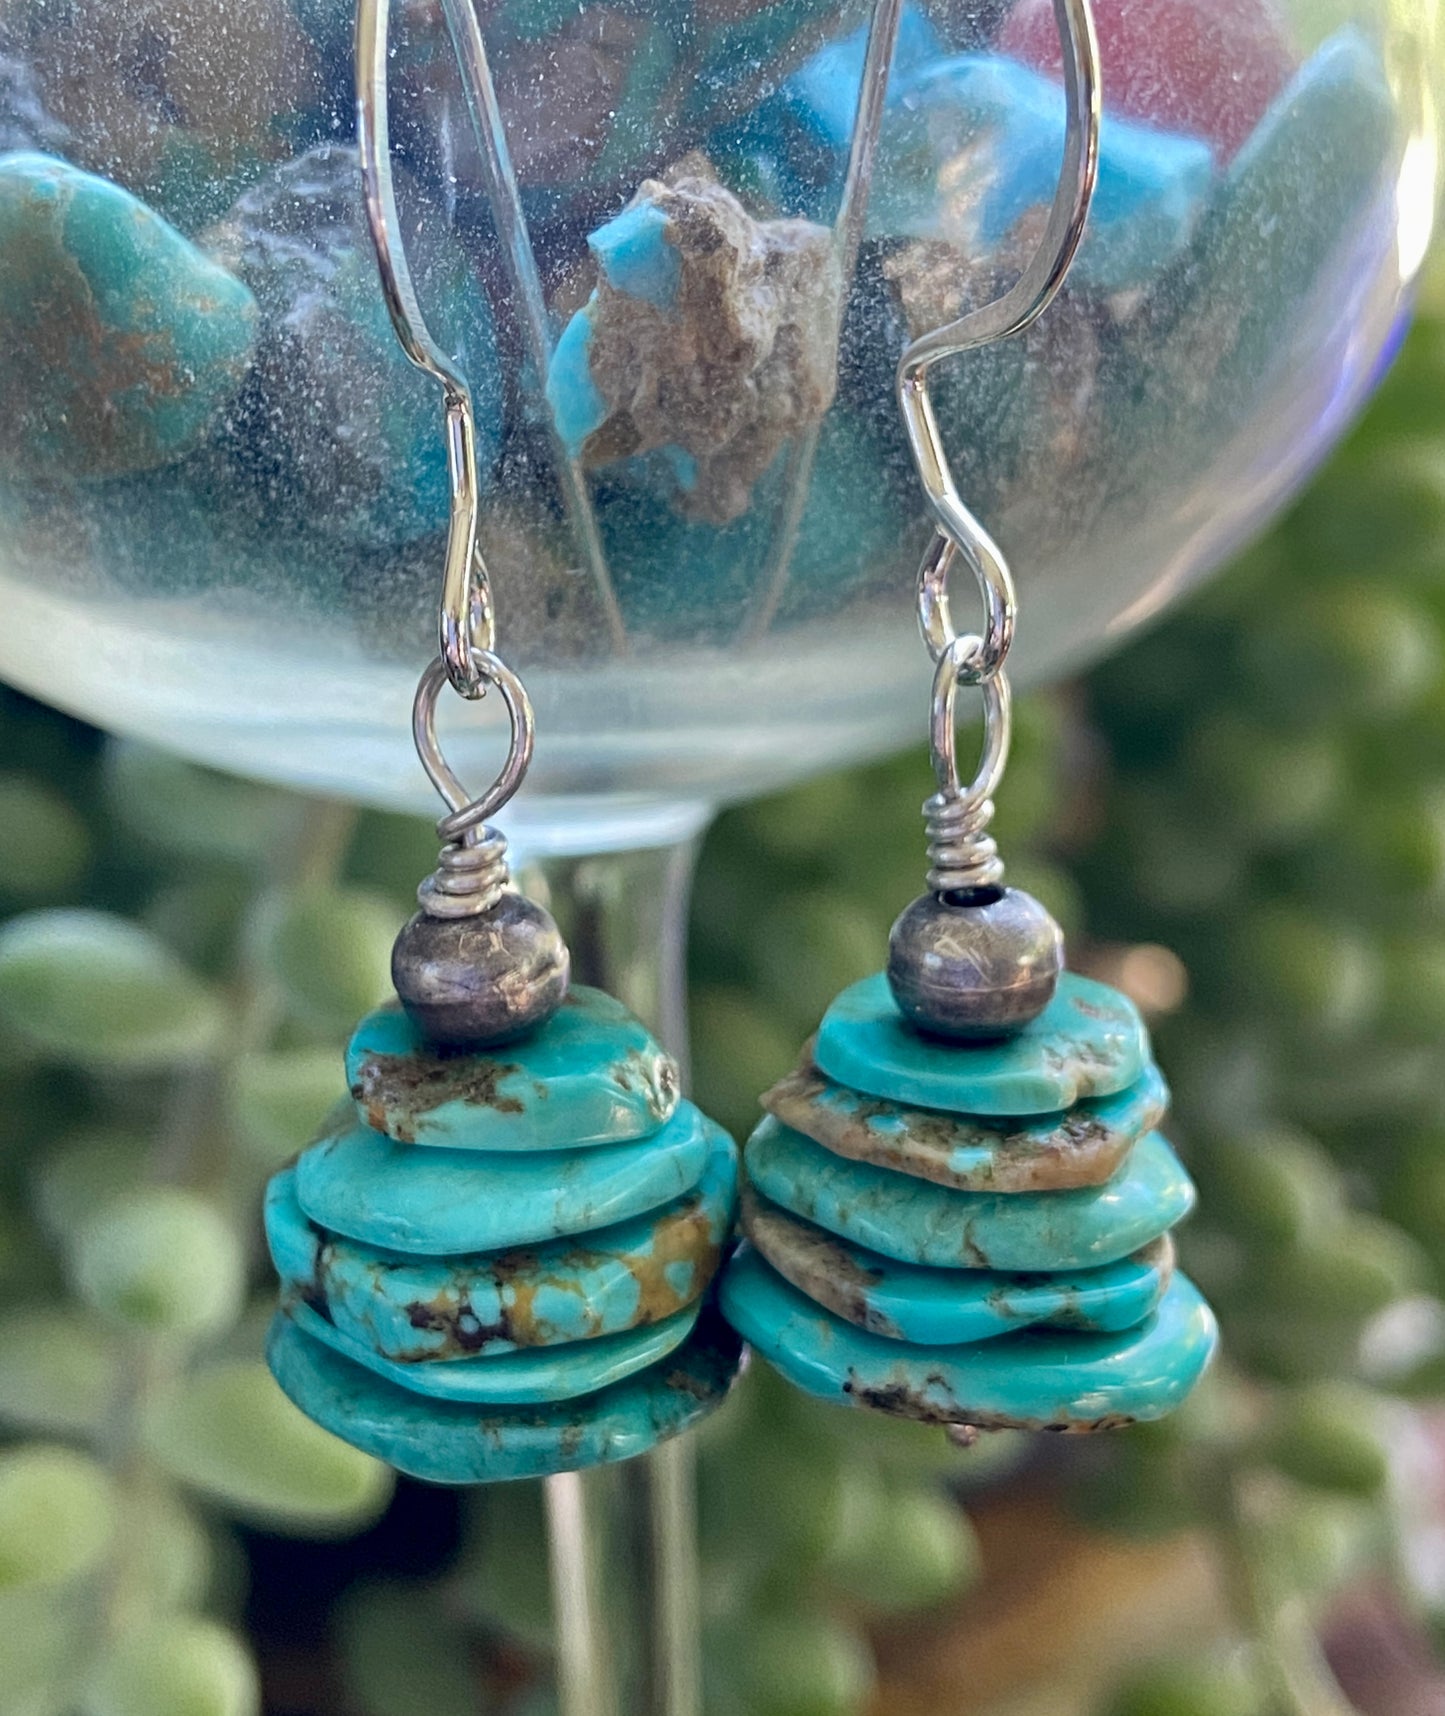 Turquoise Abstract Heshi with Antique Silver Beads Earrings